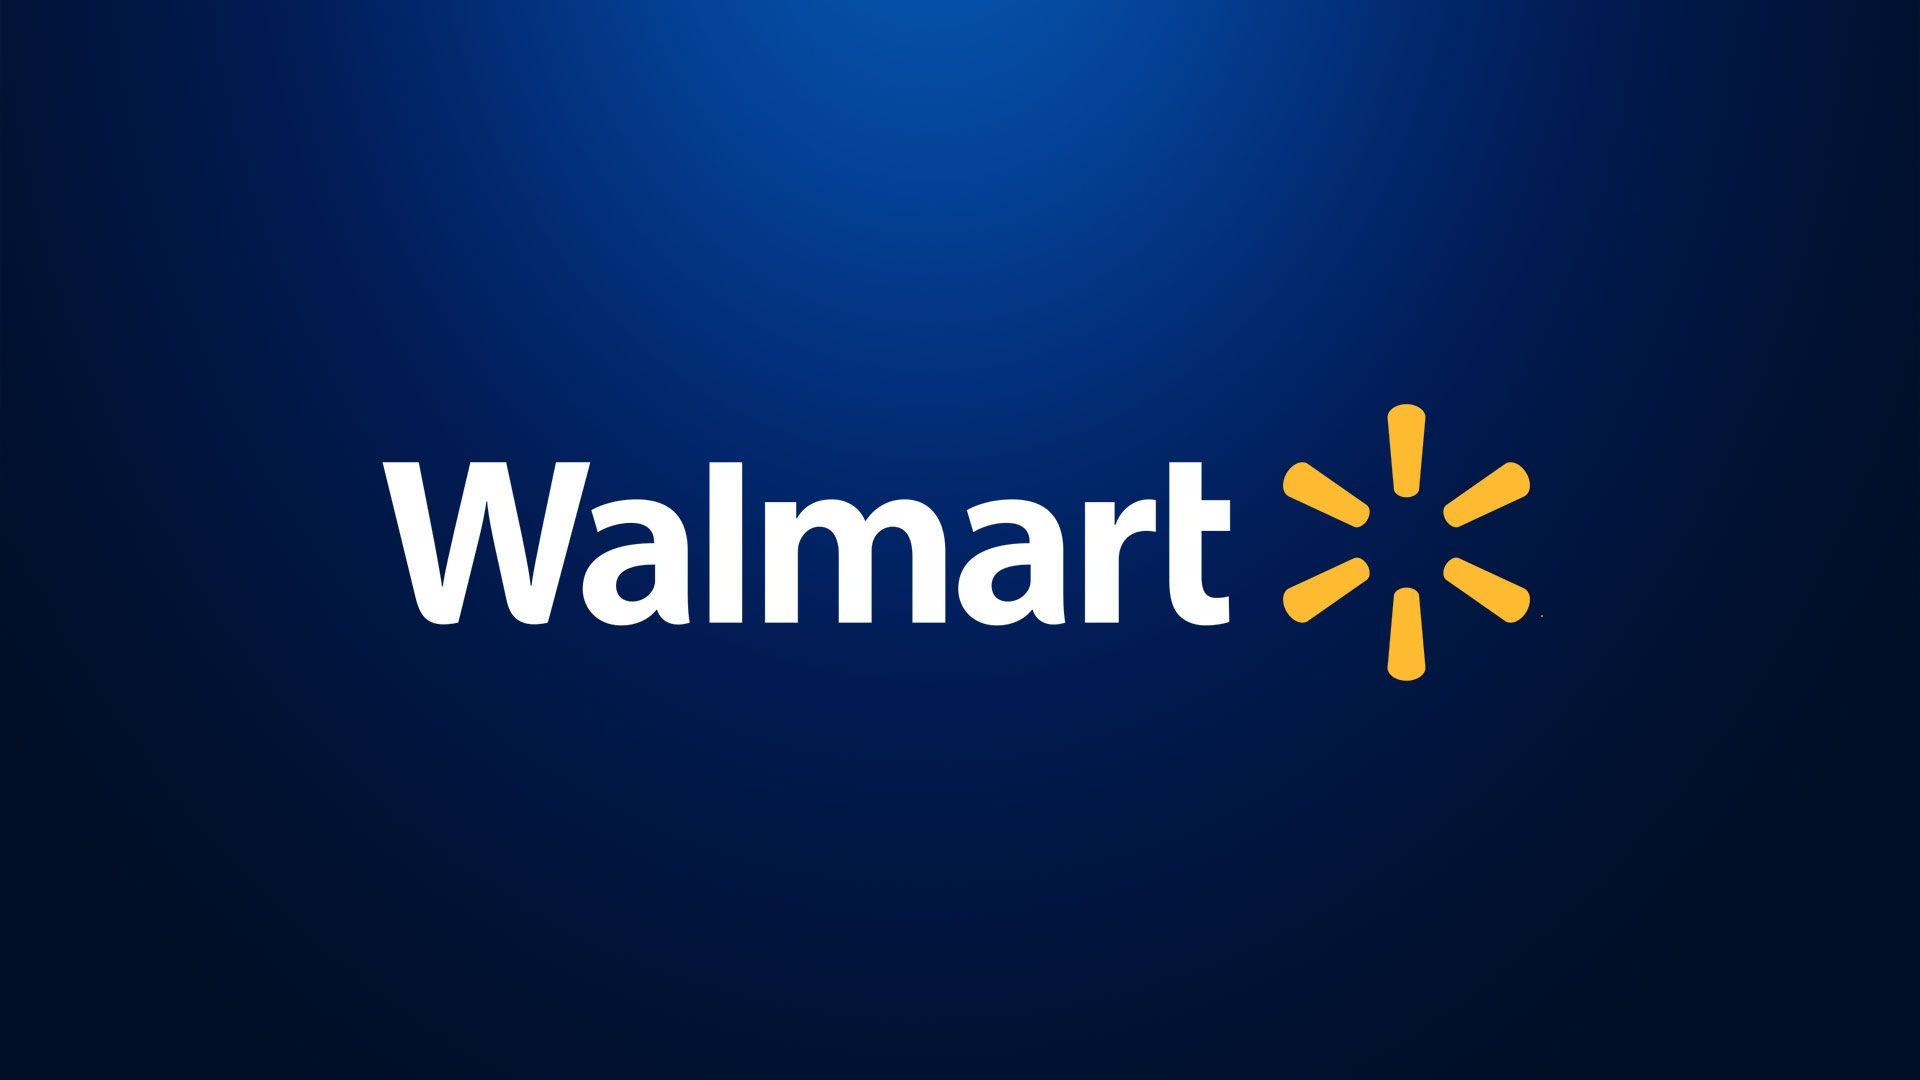 Walmart: A retailer operating grocery stores, supermarkets, hypermarkets, department and discount stores. 1920x1080 Full HD Background.